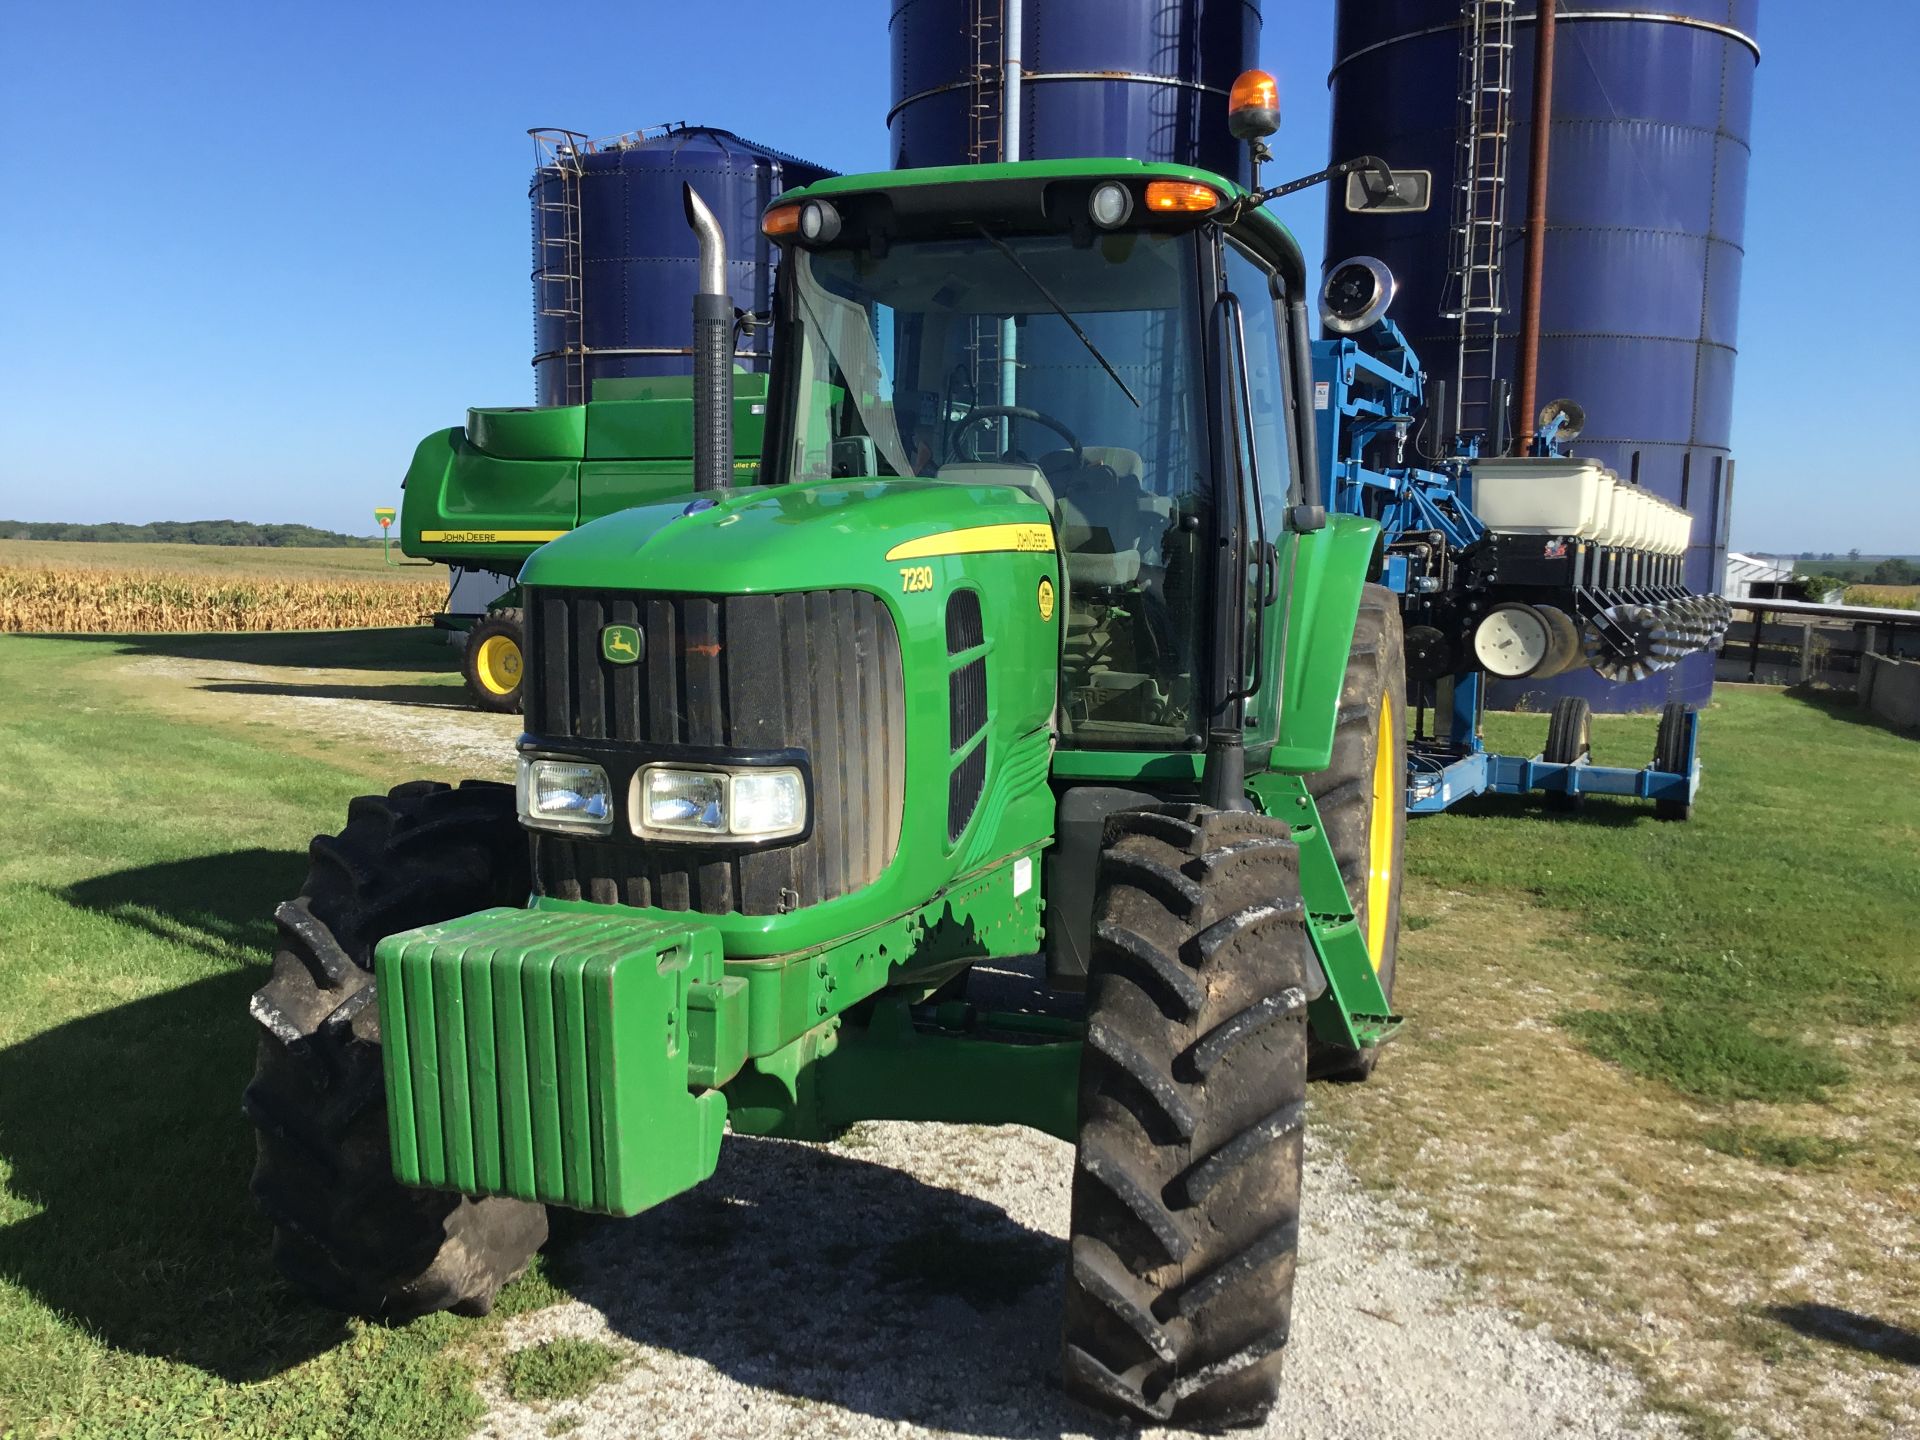 2009 JD 7230 MFWD, 24 Speed Trans, 3 Hyd. Remotes, 1000 PTO, 8 Front Wts., 460/85R38 Rear Tires, - Image 7 of 16